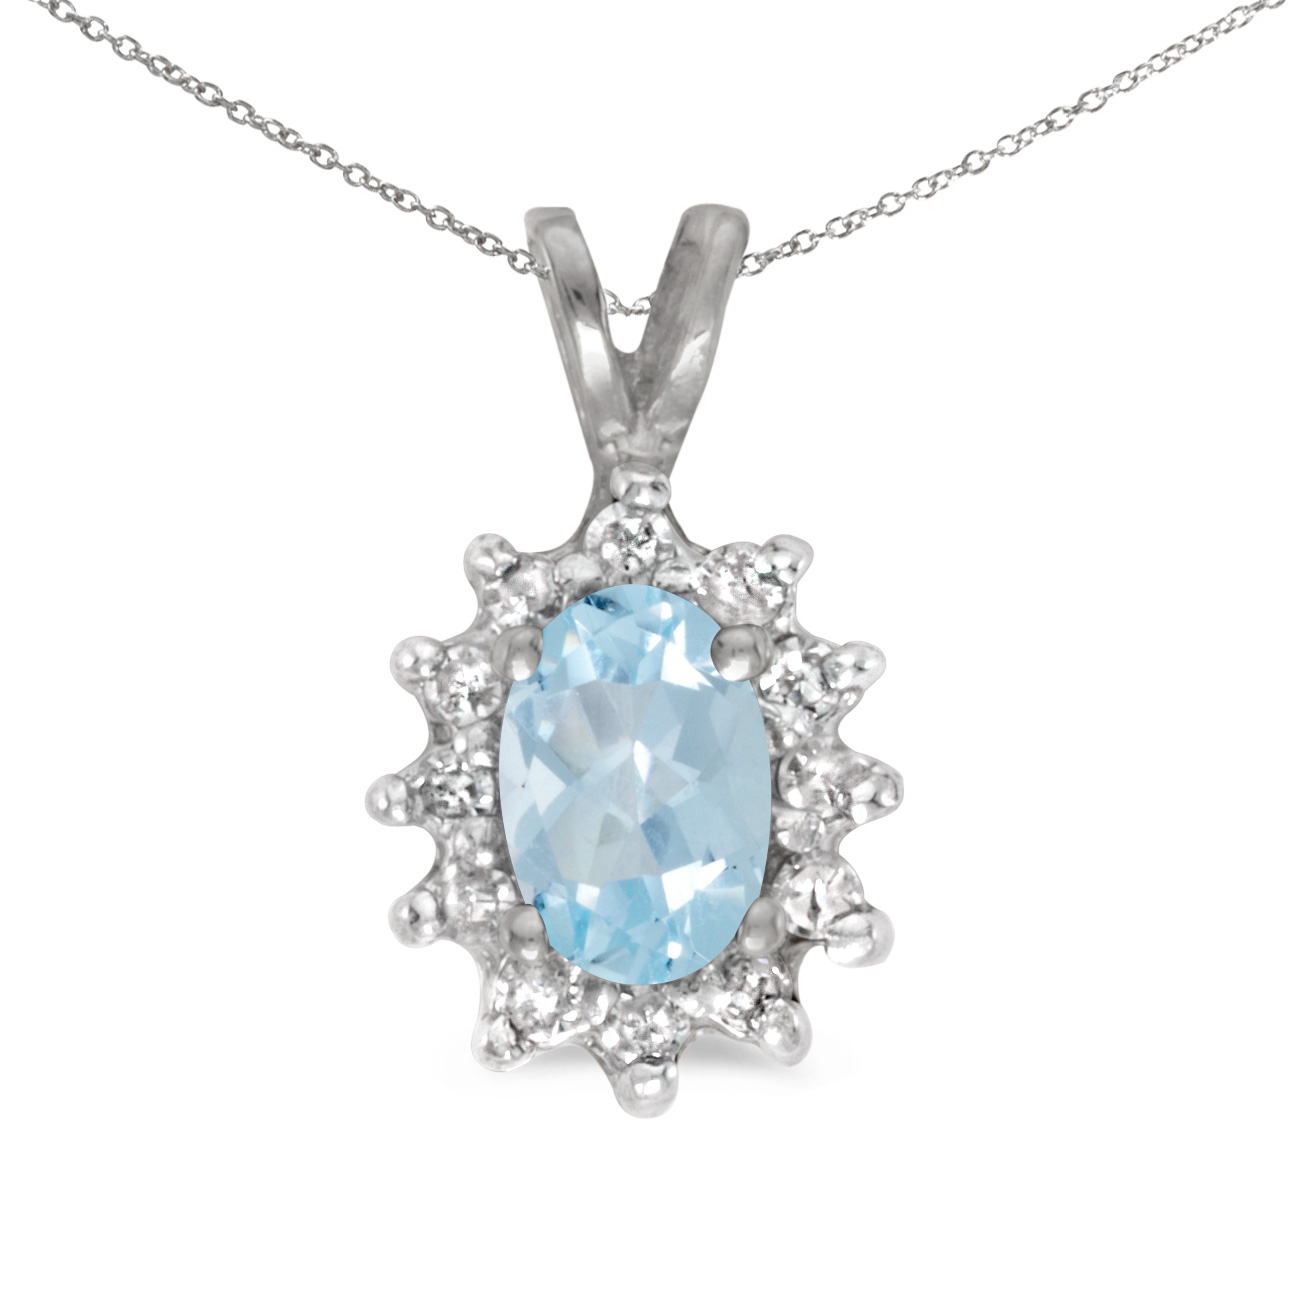 JCX2745: This 14k white gold oval aquamarine and diamond pendant features a 6x4 mm genuine natural aquamarine with a 0.29 ct total weight.